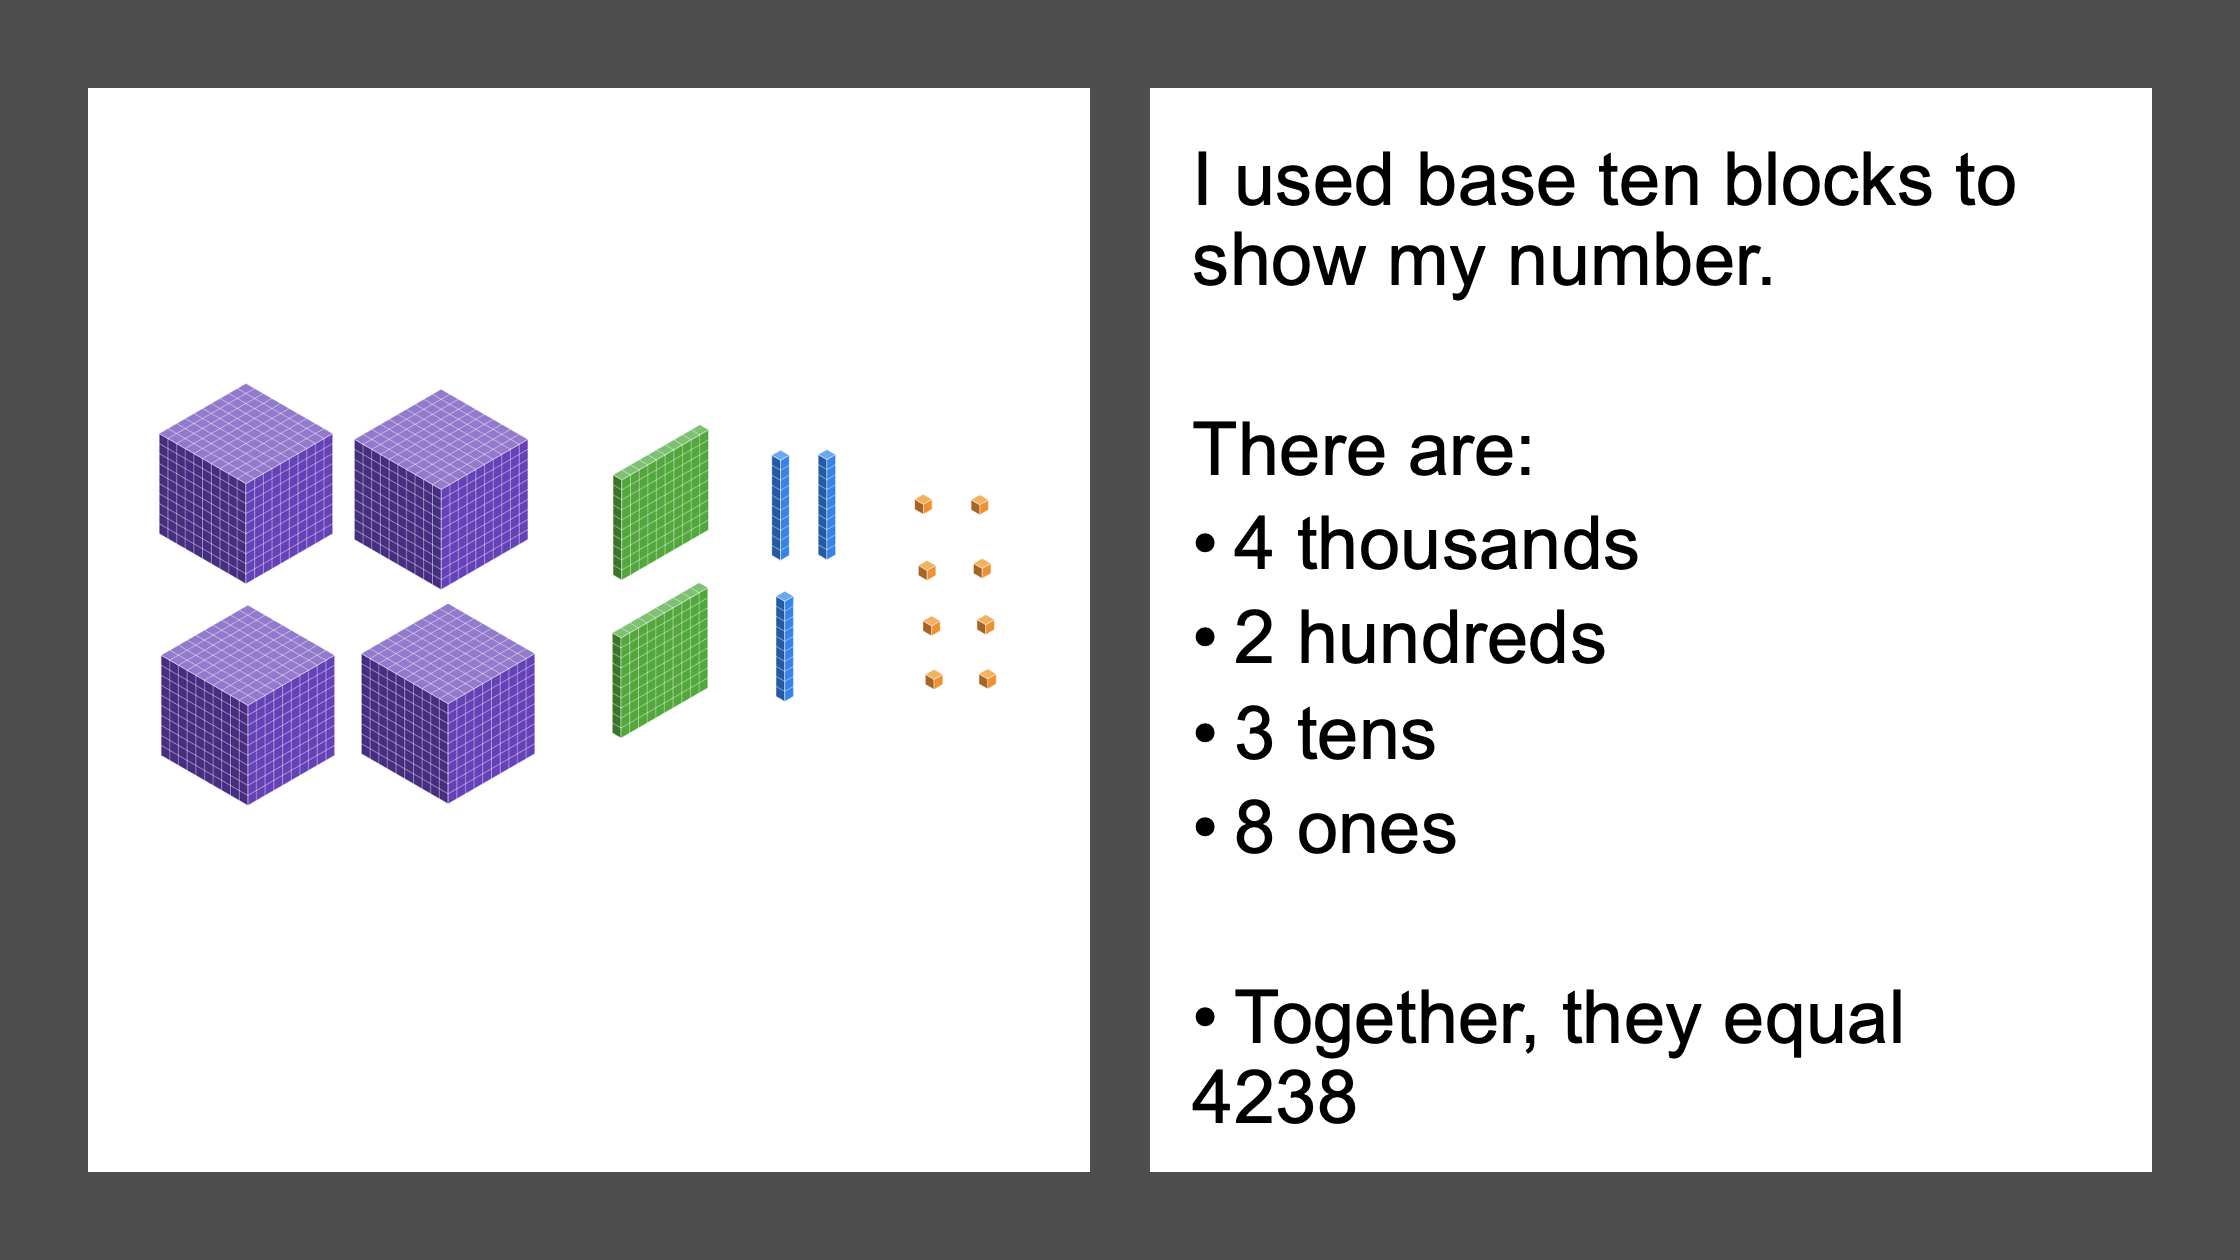 This image shows a large number represented with base ten blocks